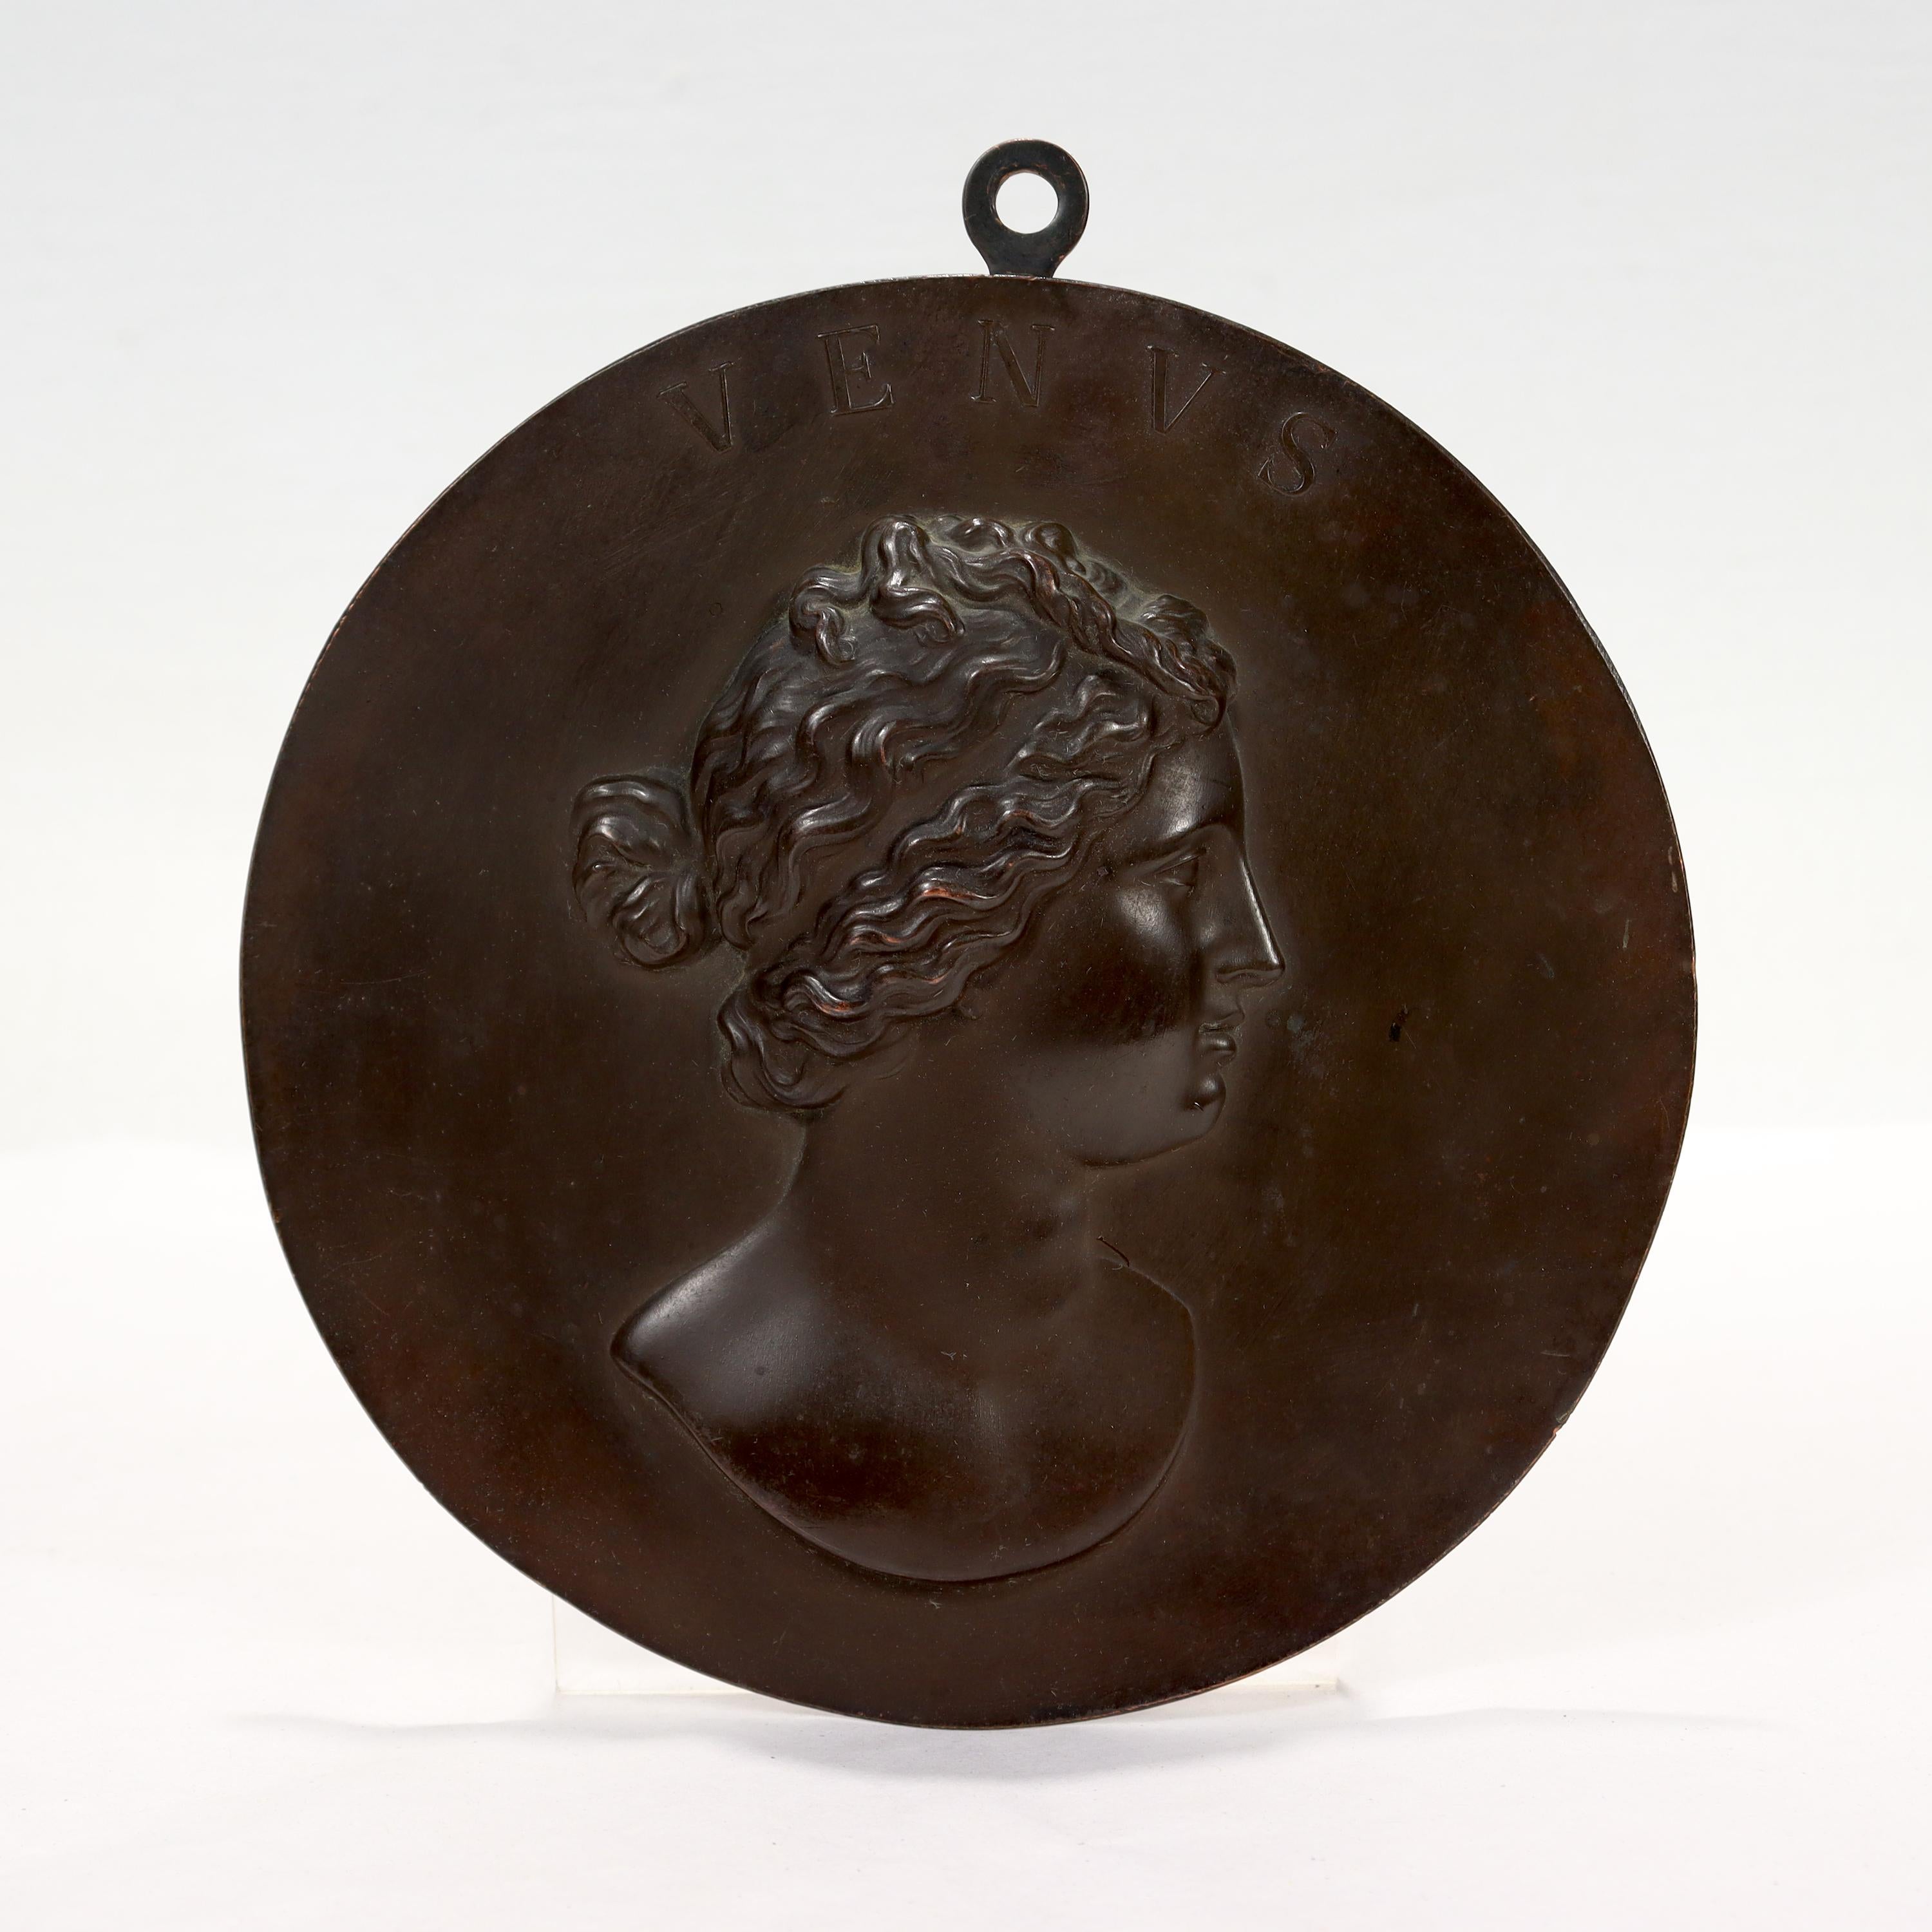 An antique roundel.

In bronzed copper and fixed with an integral bail for hanging on the wall.

Depicting Venus De Milo in profile. 

Simply a wonderful Grand Tour souvenir!

Date:
Late 19th Century

Overall Condition:
It is in overall